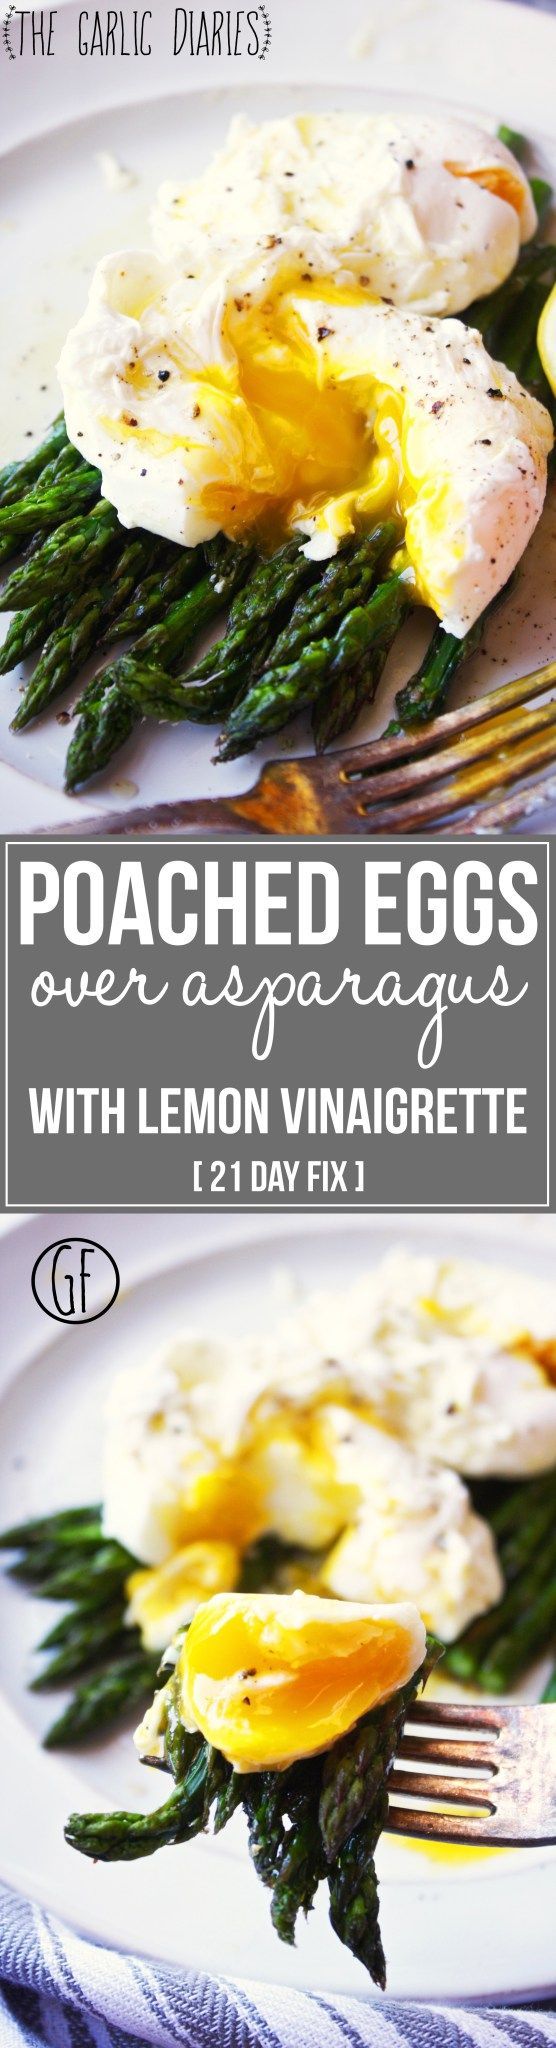 Poached Eggs over Roasted Asparagus with Lemon Vinaigrette [21 Day Fix] – The perfect combination of flavors and textures! Rich